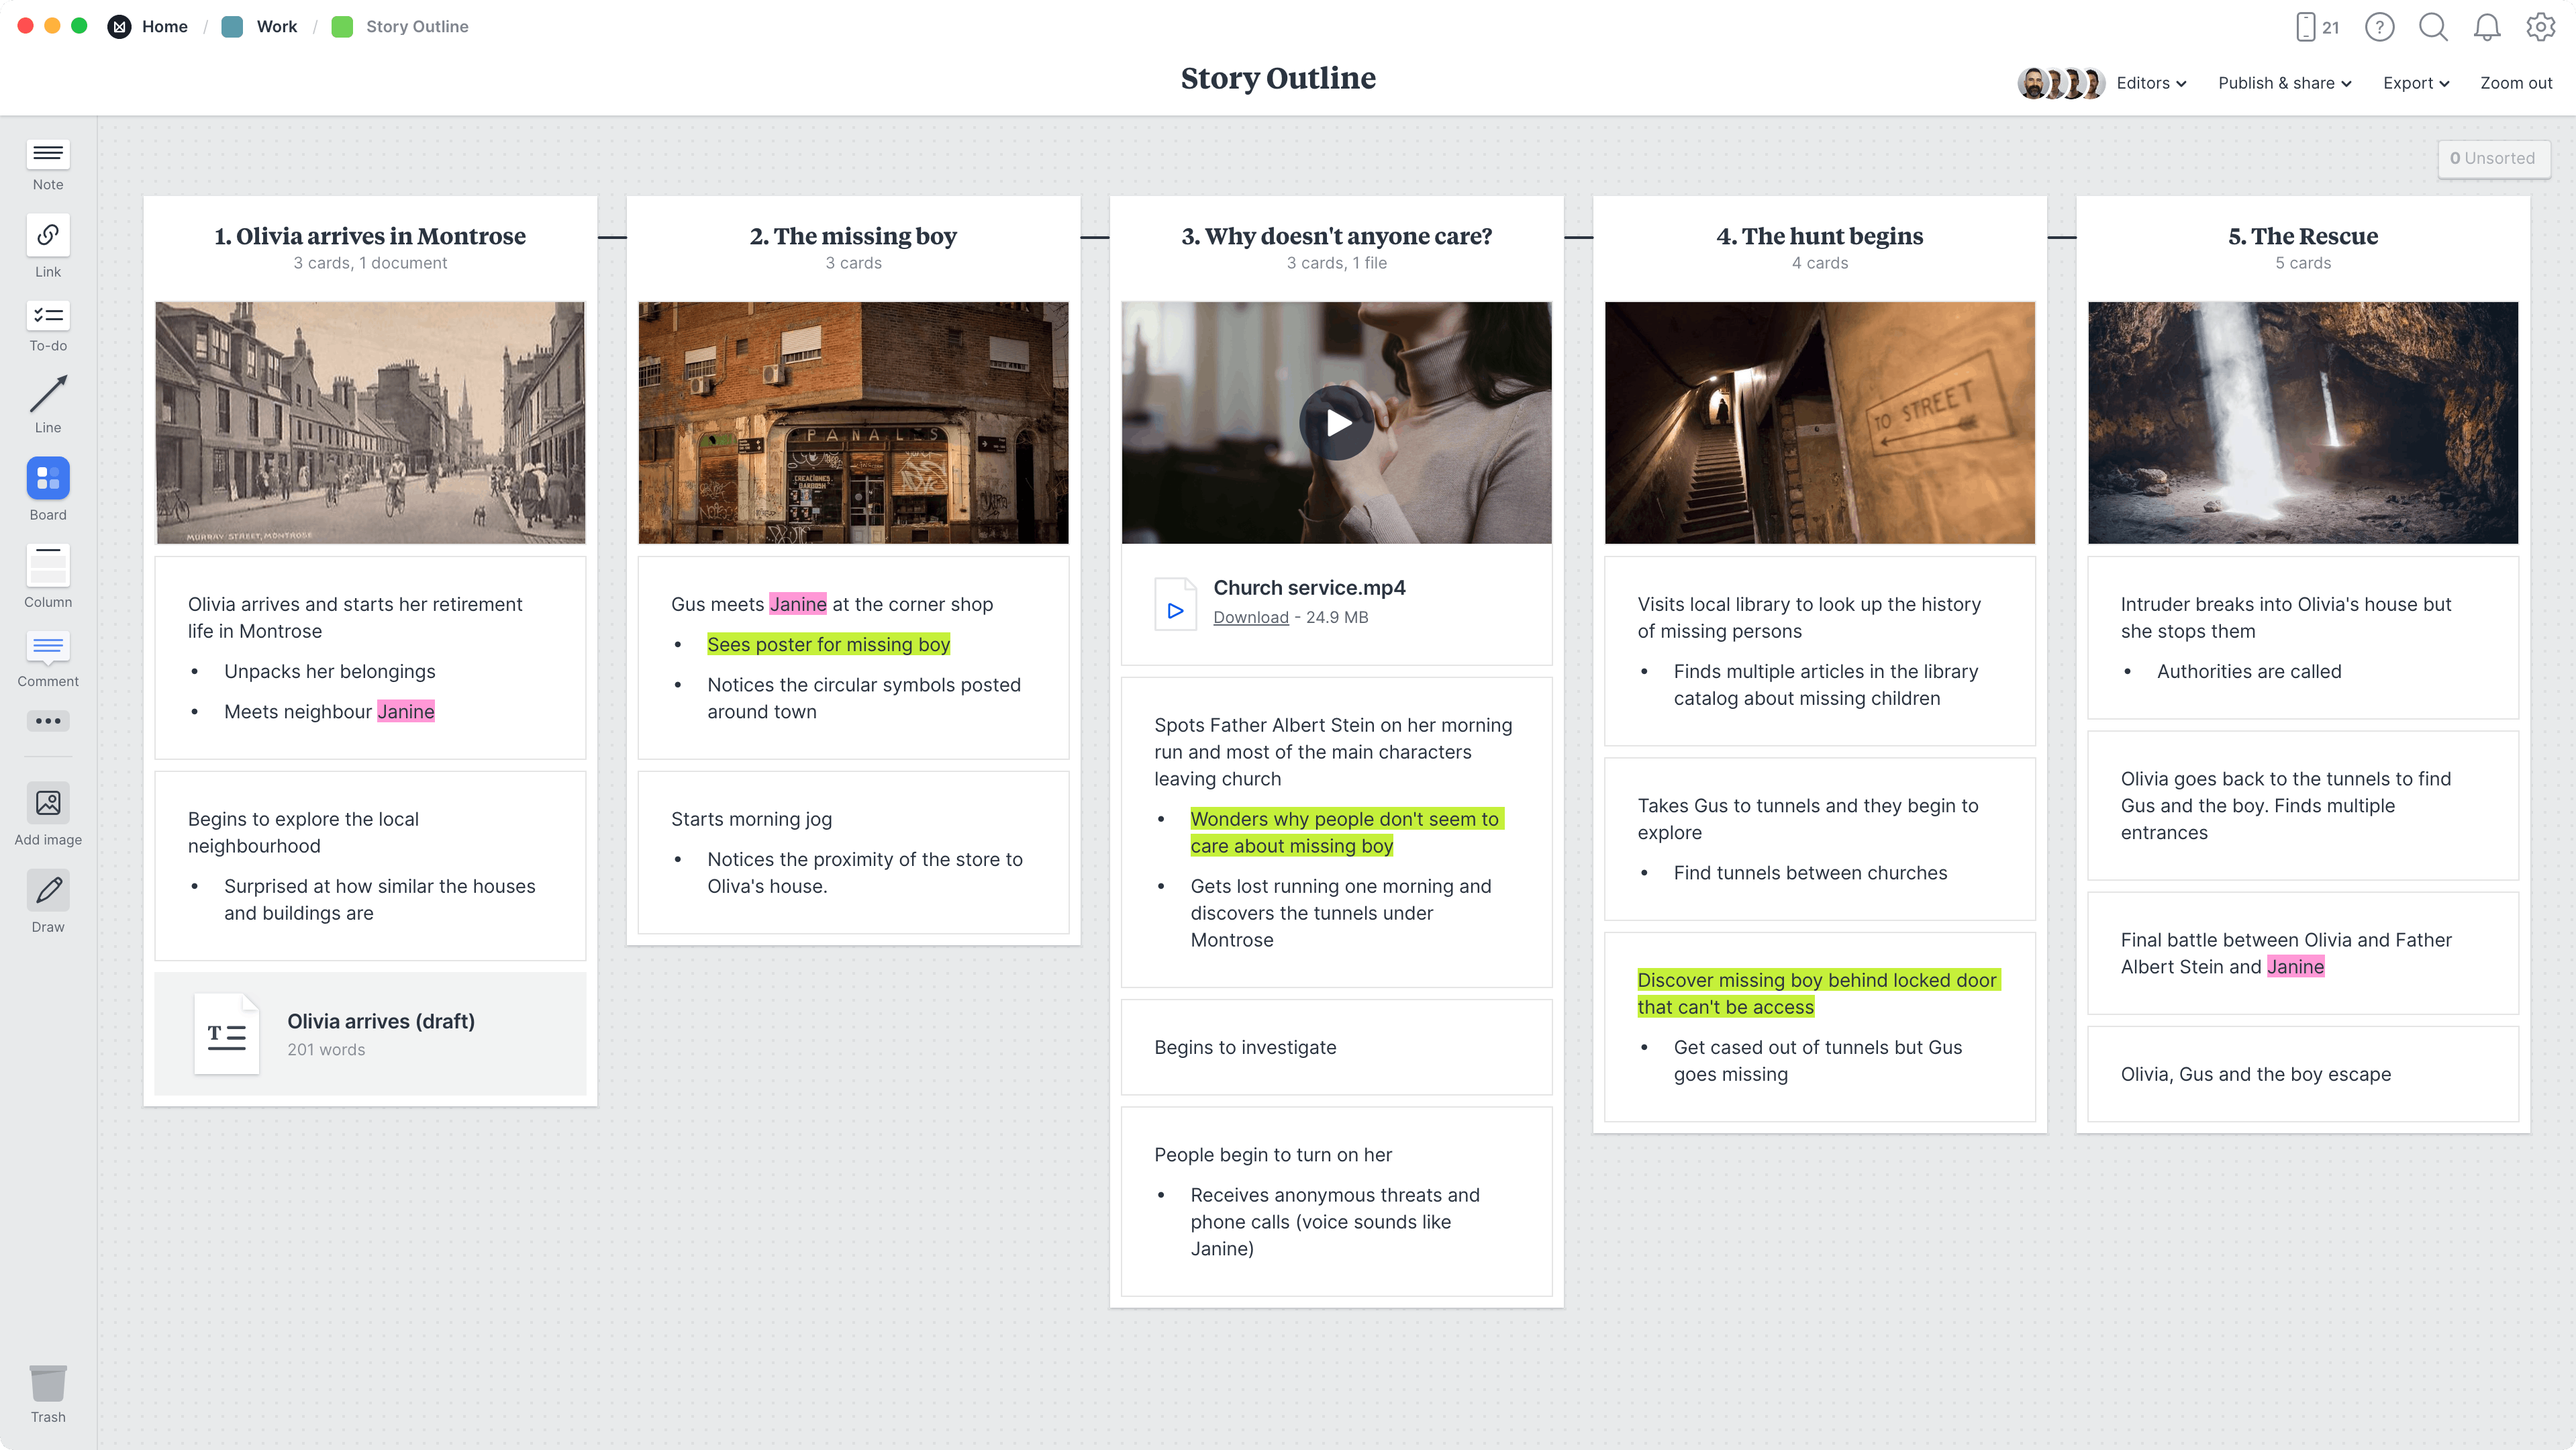 Story Outline Template, within the Milanote app